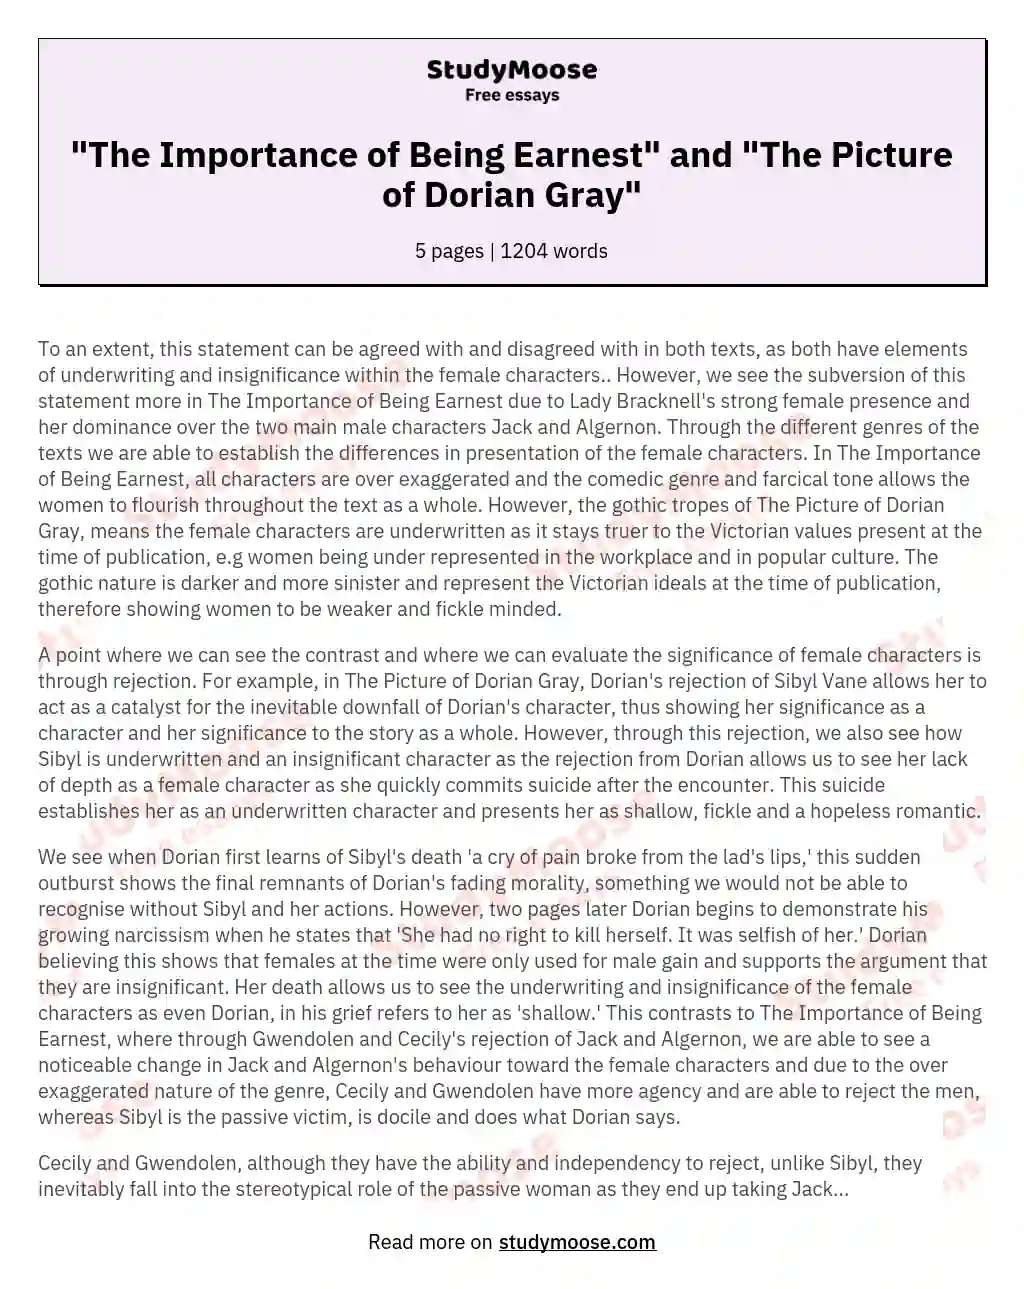 "The Importance of Being Earnest" and "The Picture of Dorian Gray"